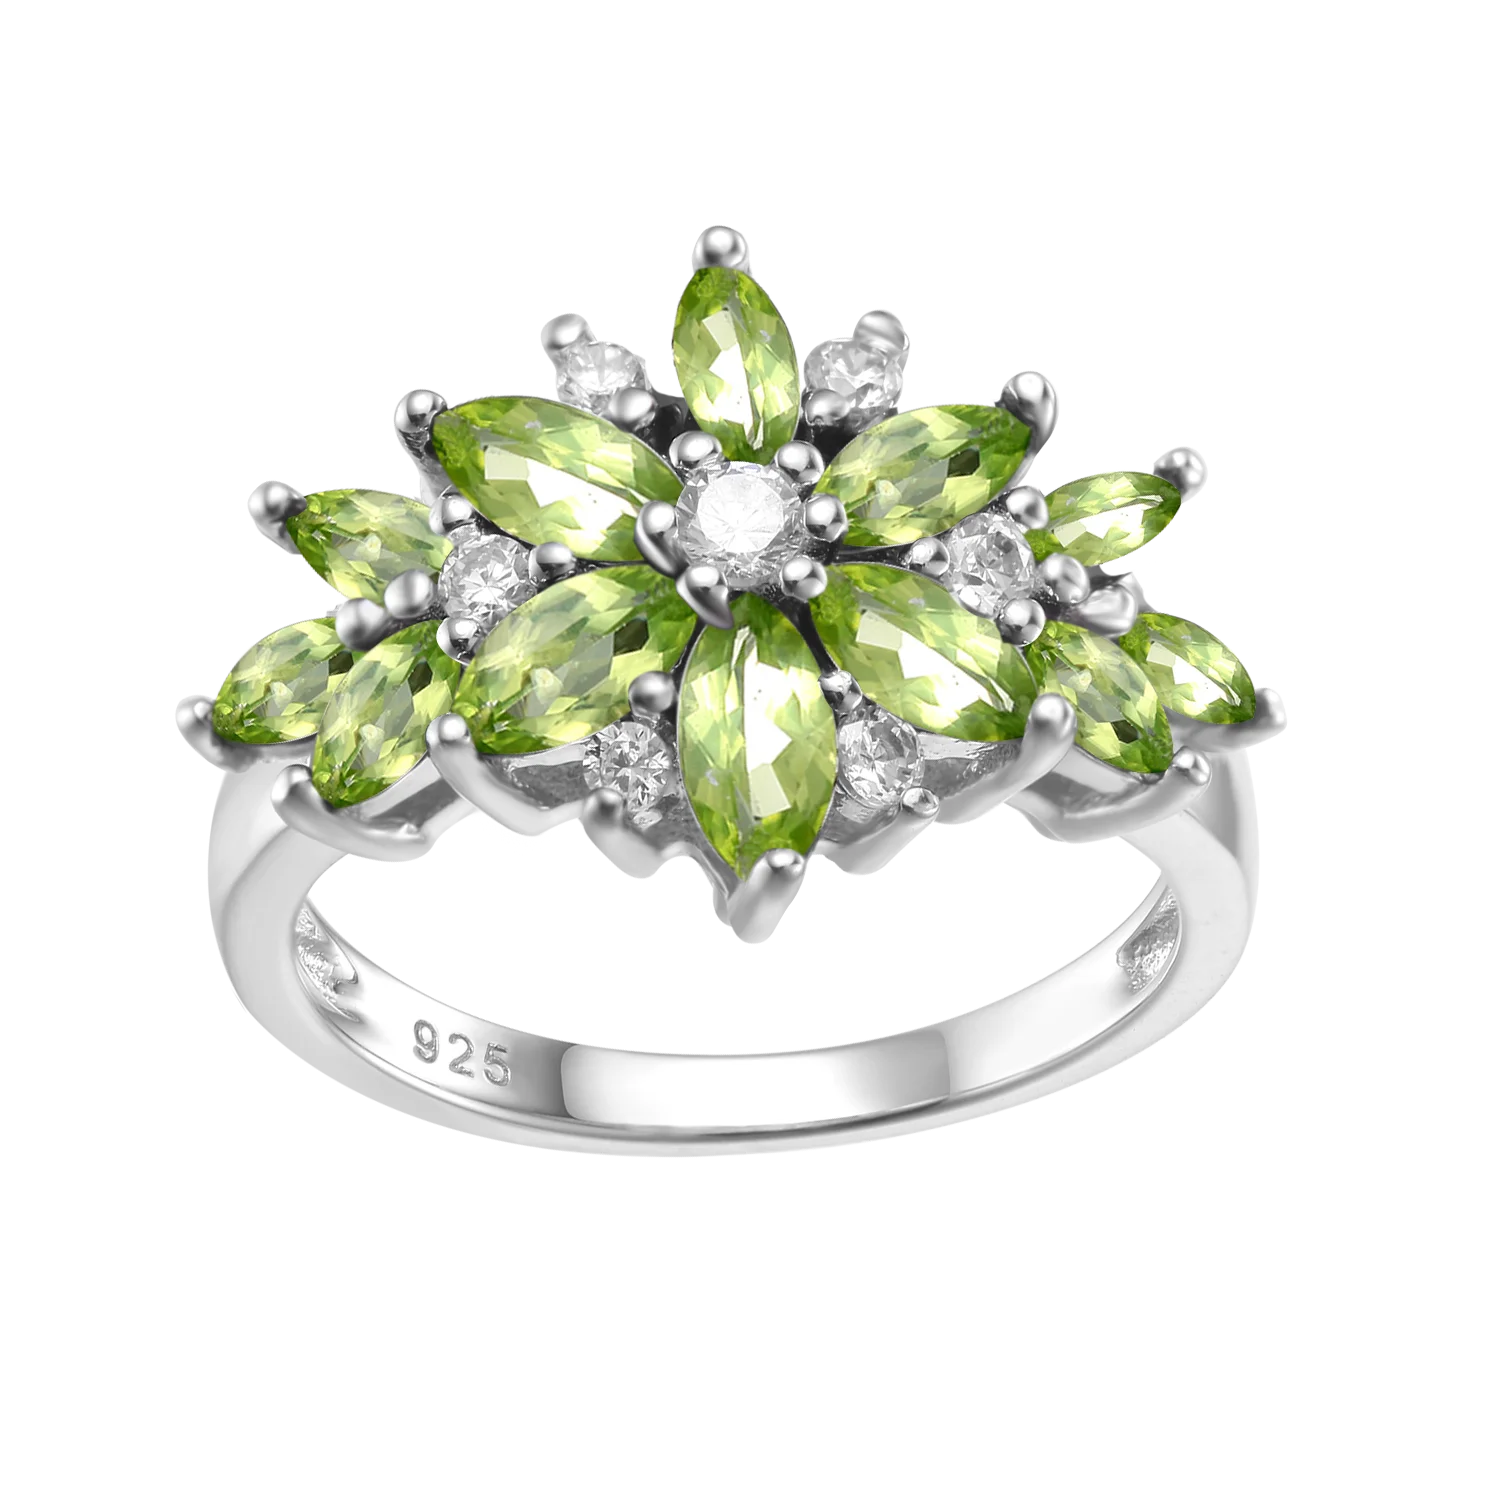 GEM'S BALLET Real 925 Sterling Silver Tourmaline Rings For Women Natural Gemstone Ring Romantic Gift Engagement Jewelry Peridot CHINA